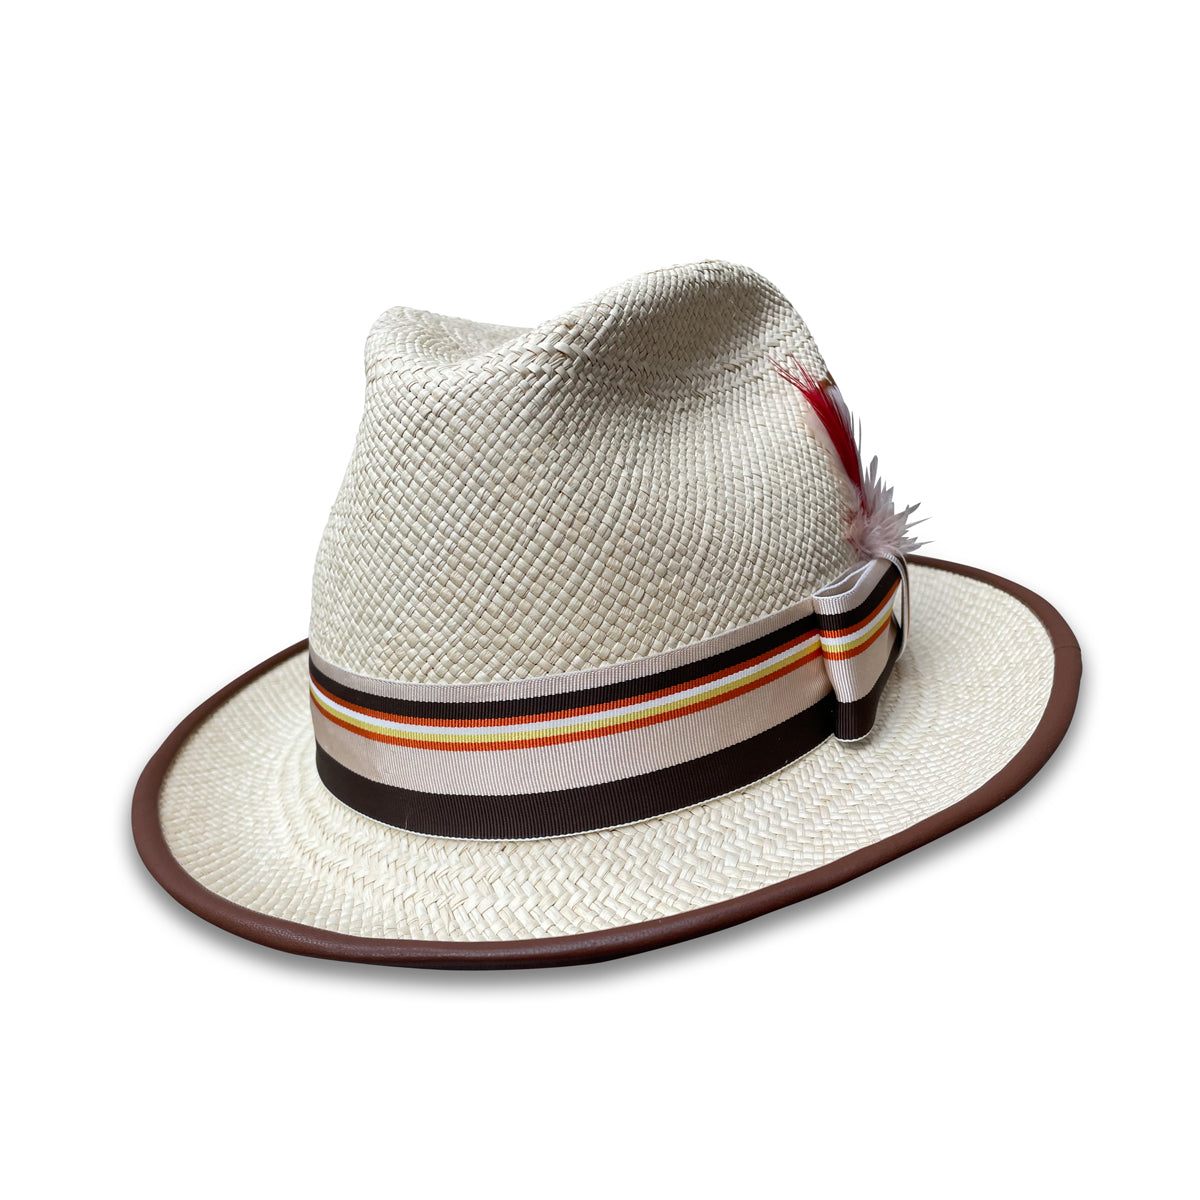 Panama Straw Hat for Men from NYC hat maker Cha Cha's House of Ill Repute